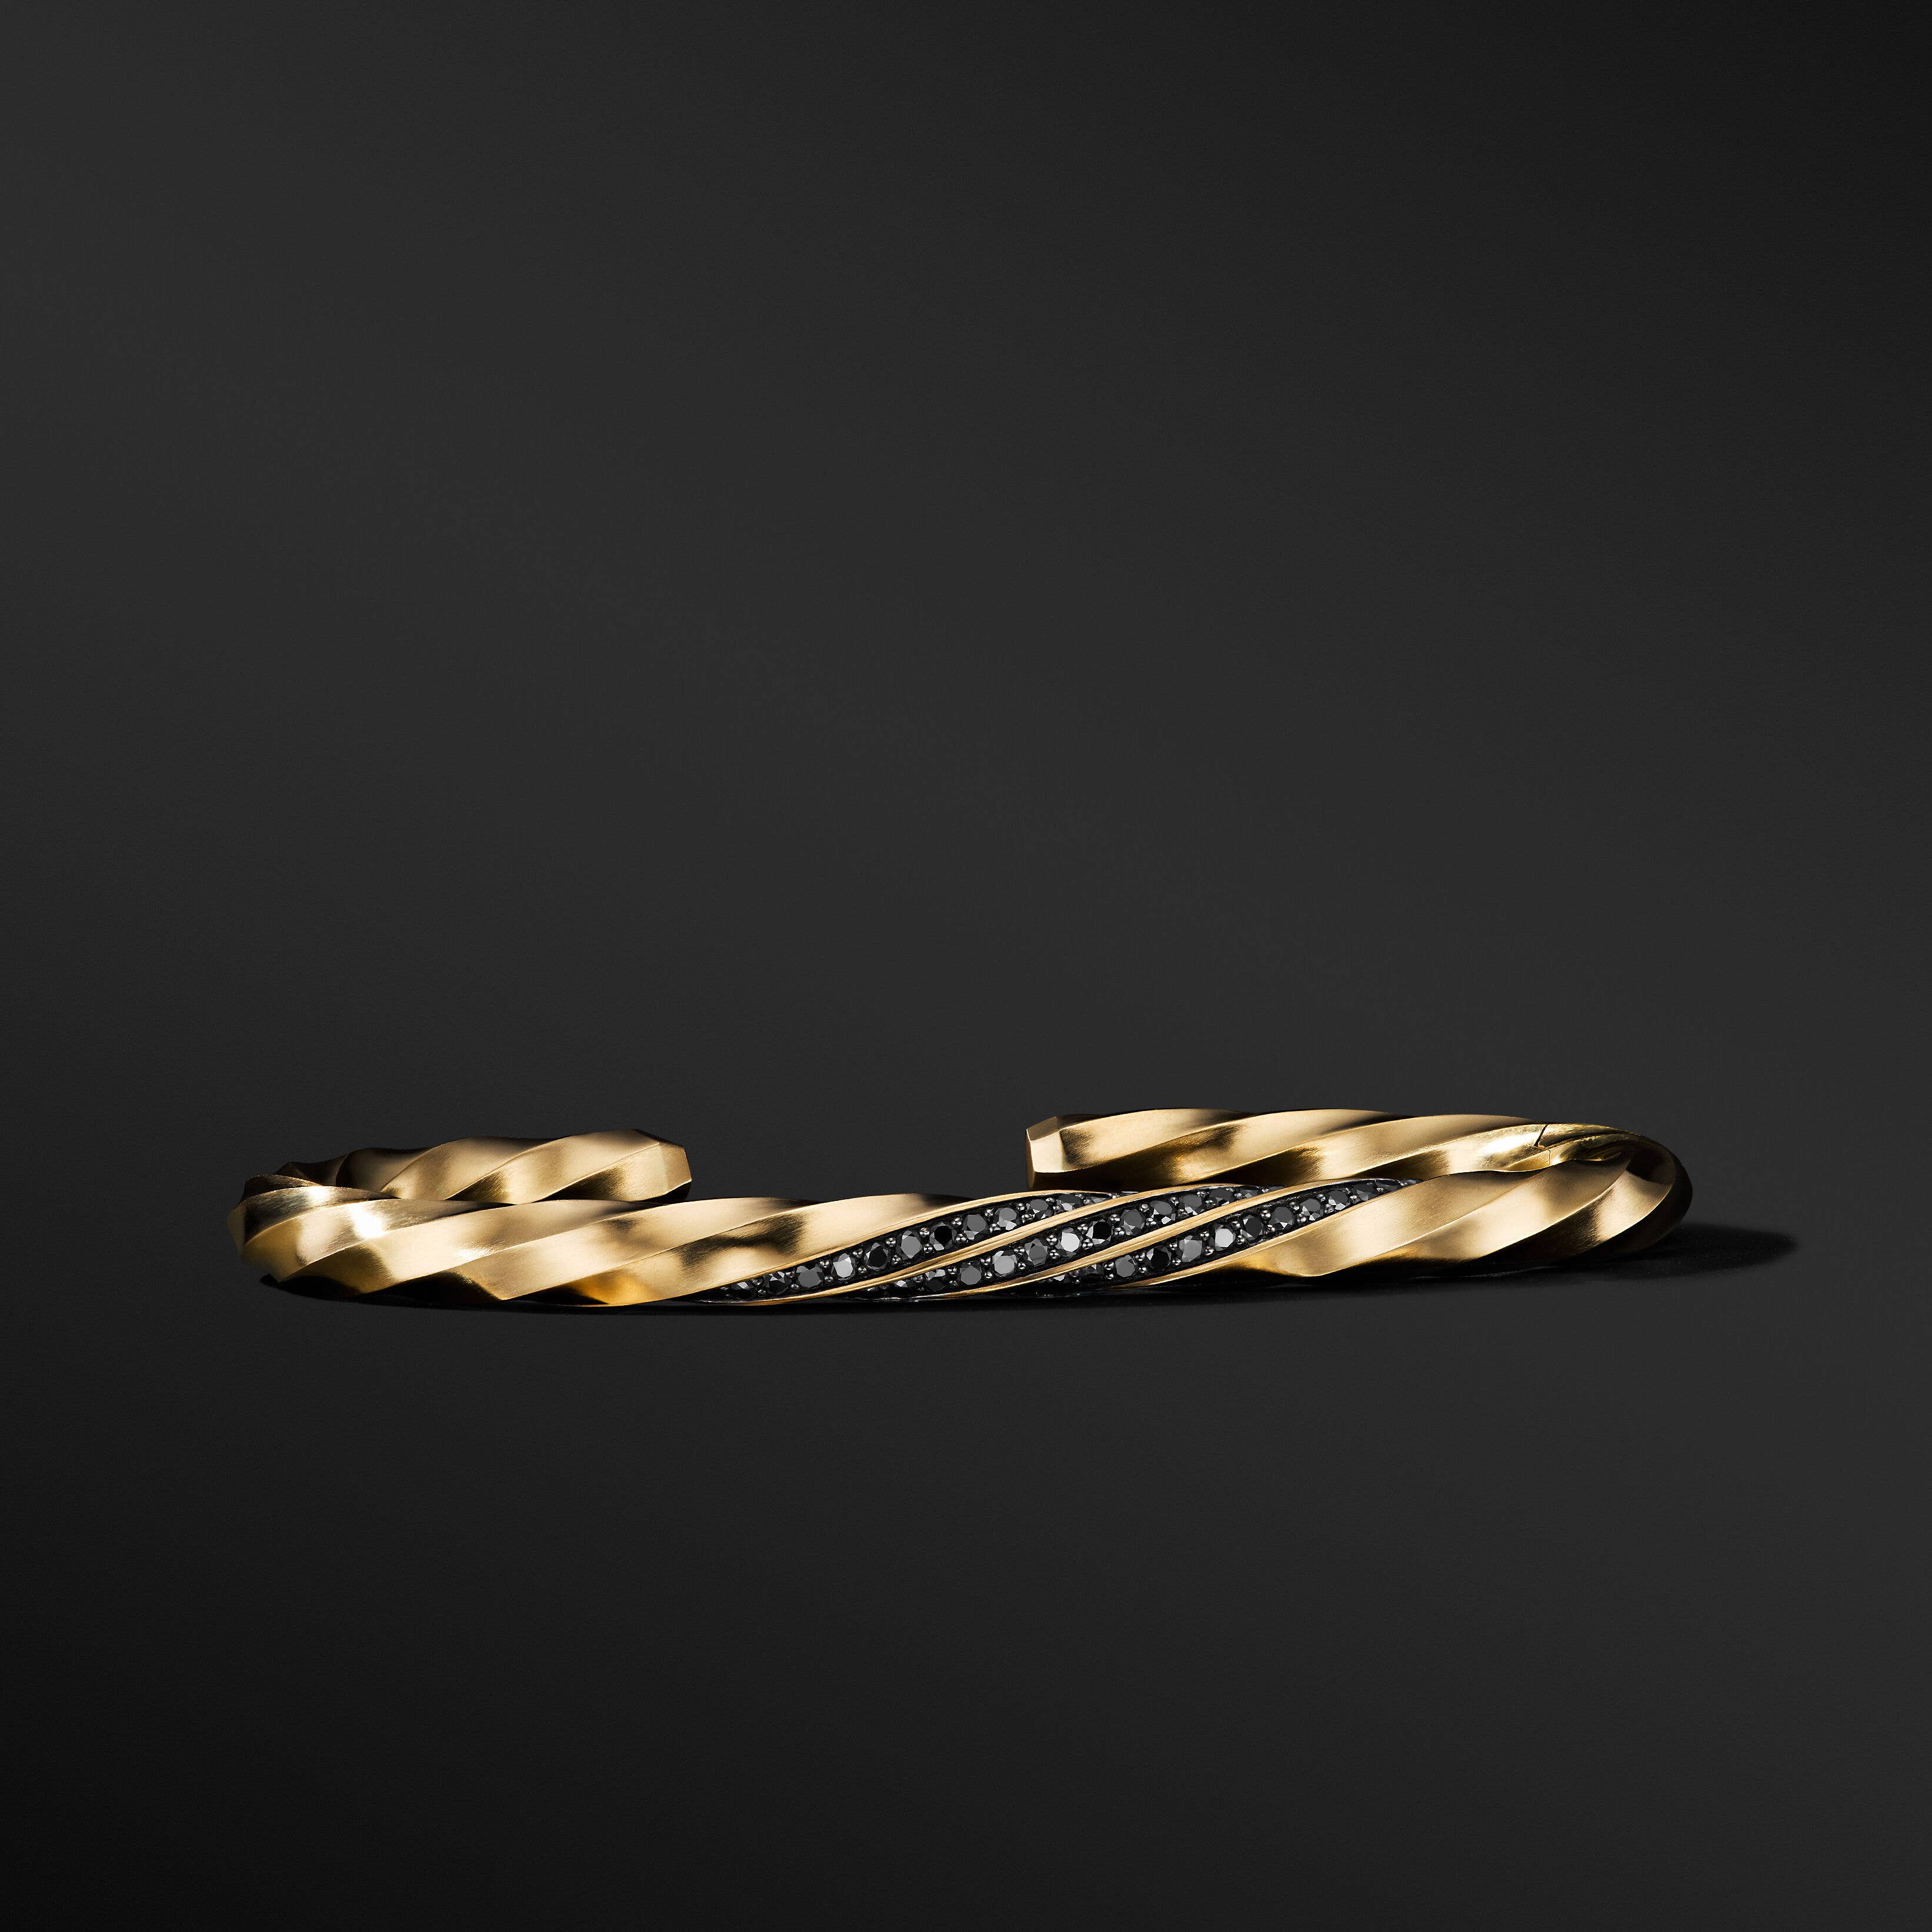 Cable Edge® Cuff Bracelet in 18K Yellow Gold with Pavé Black Diamonds